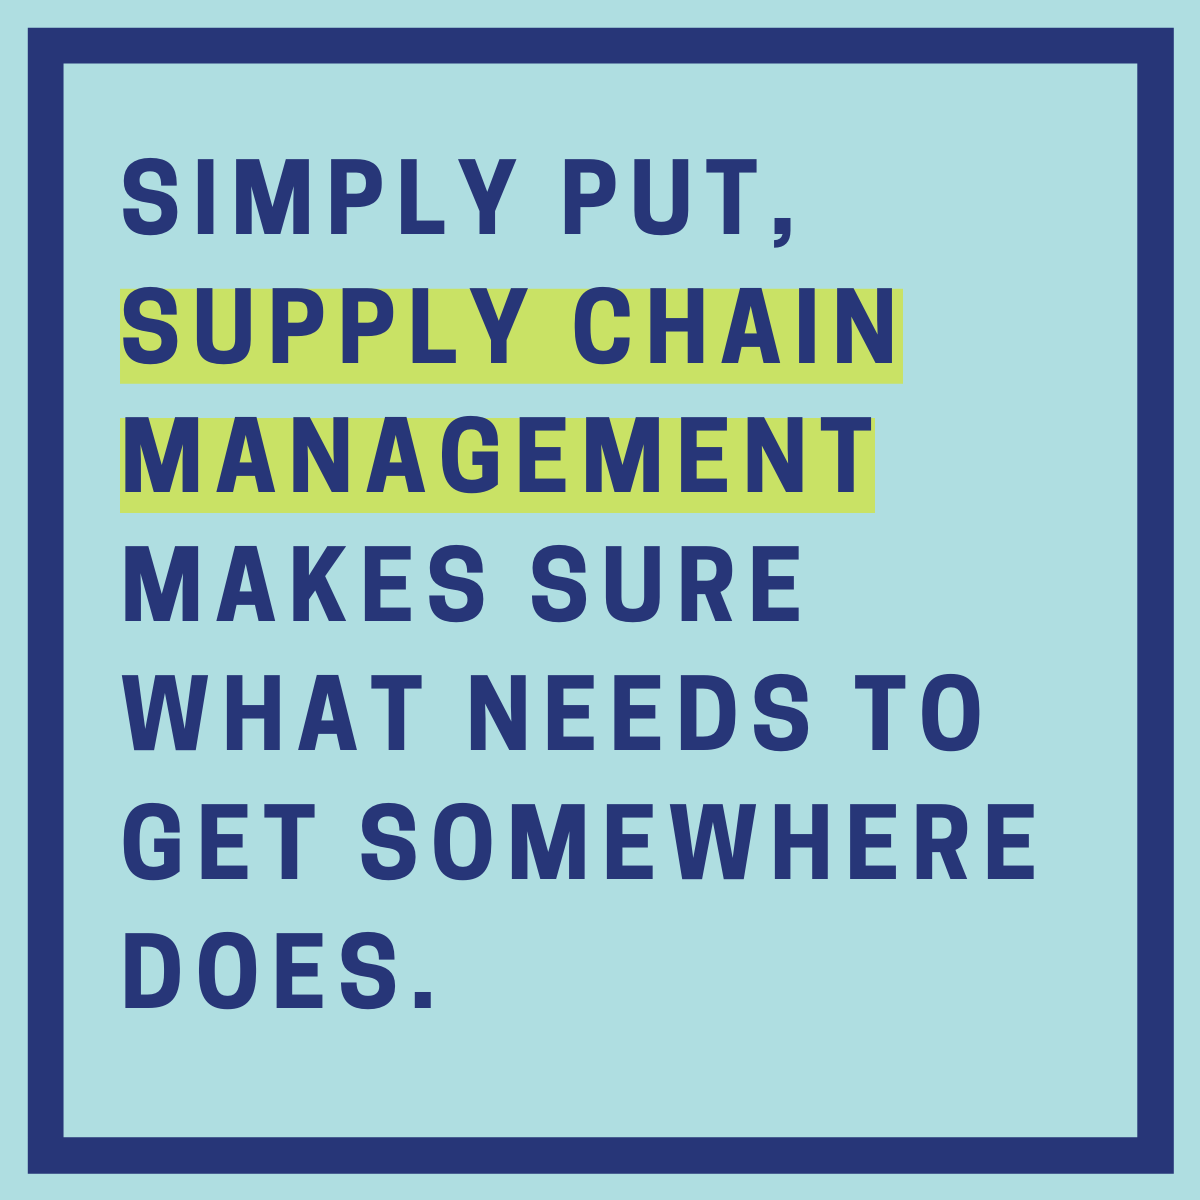 Simply put, supply chain management makes sure what needs to get somewhere does.